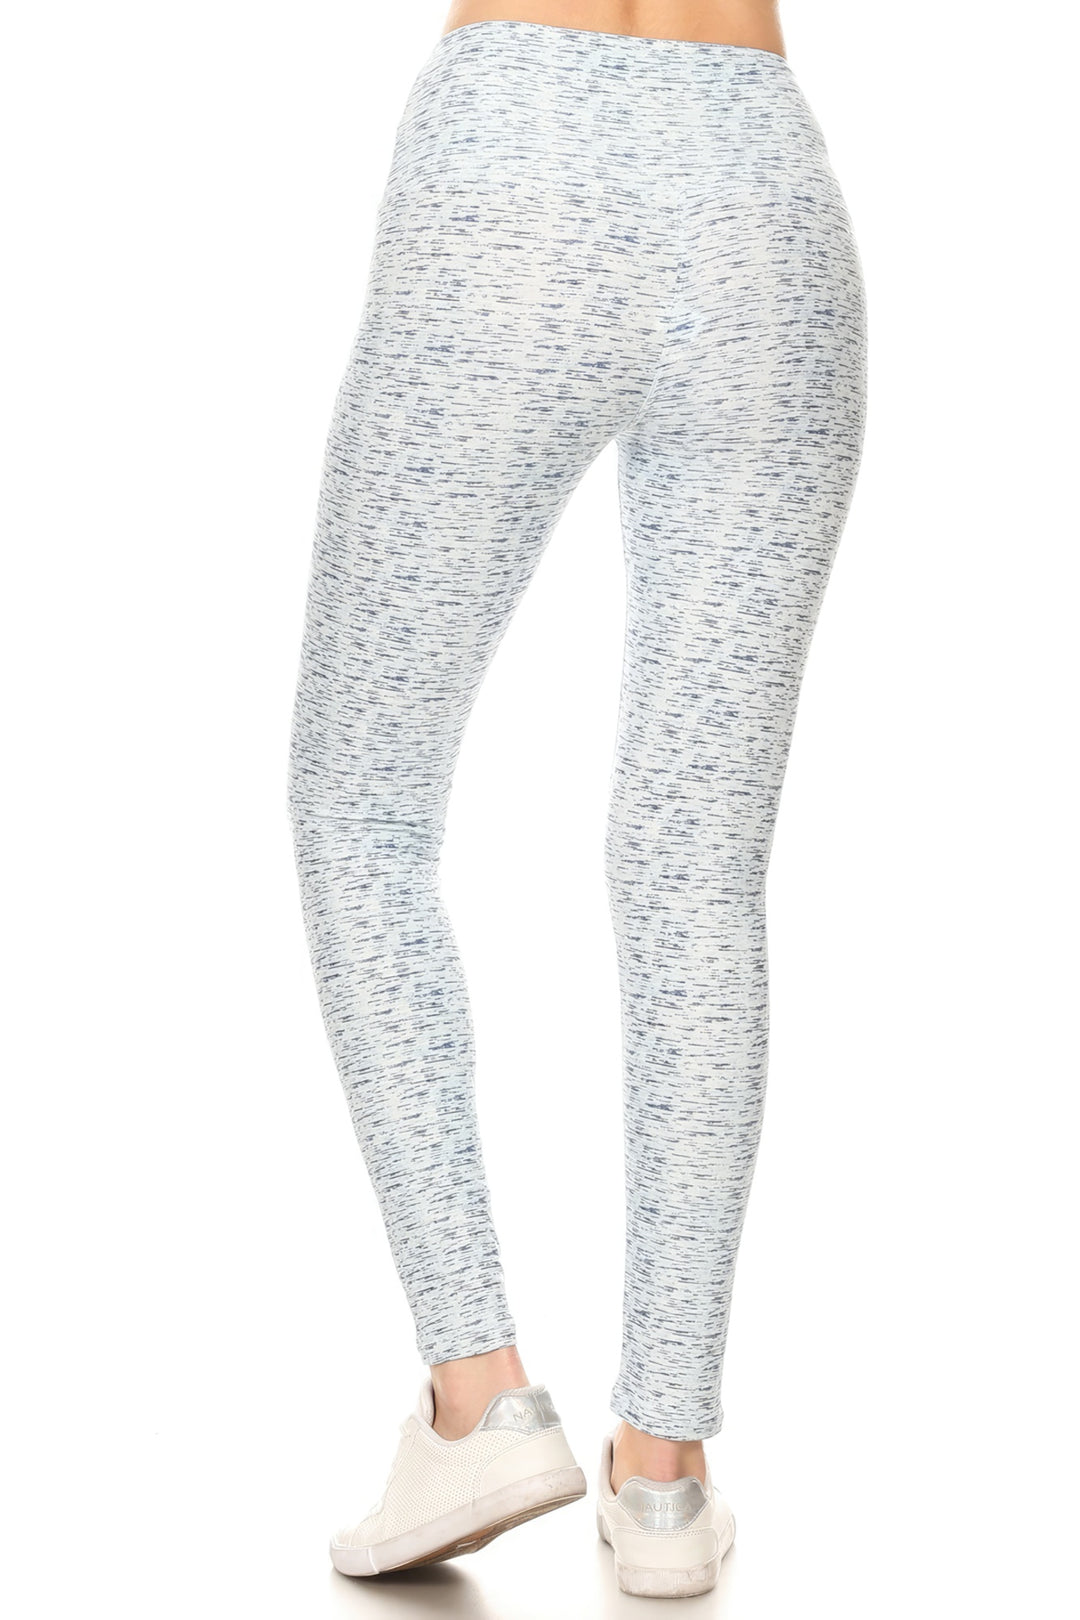 a person in white and blue patterned leggings